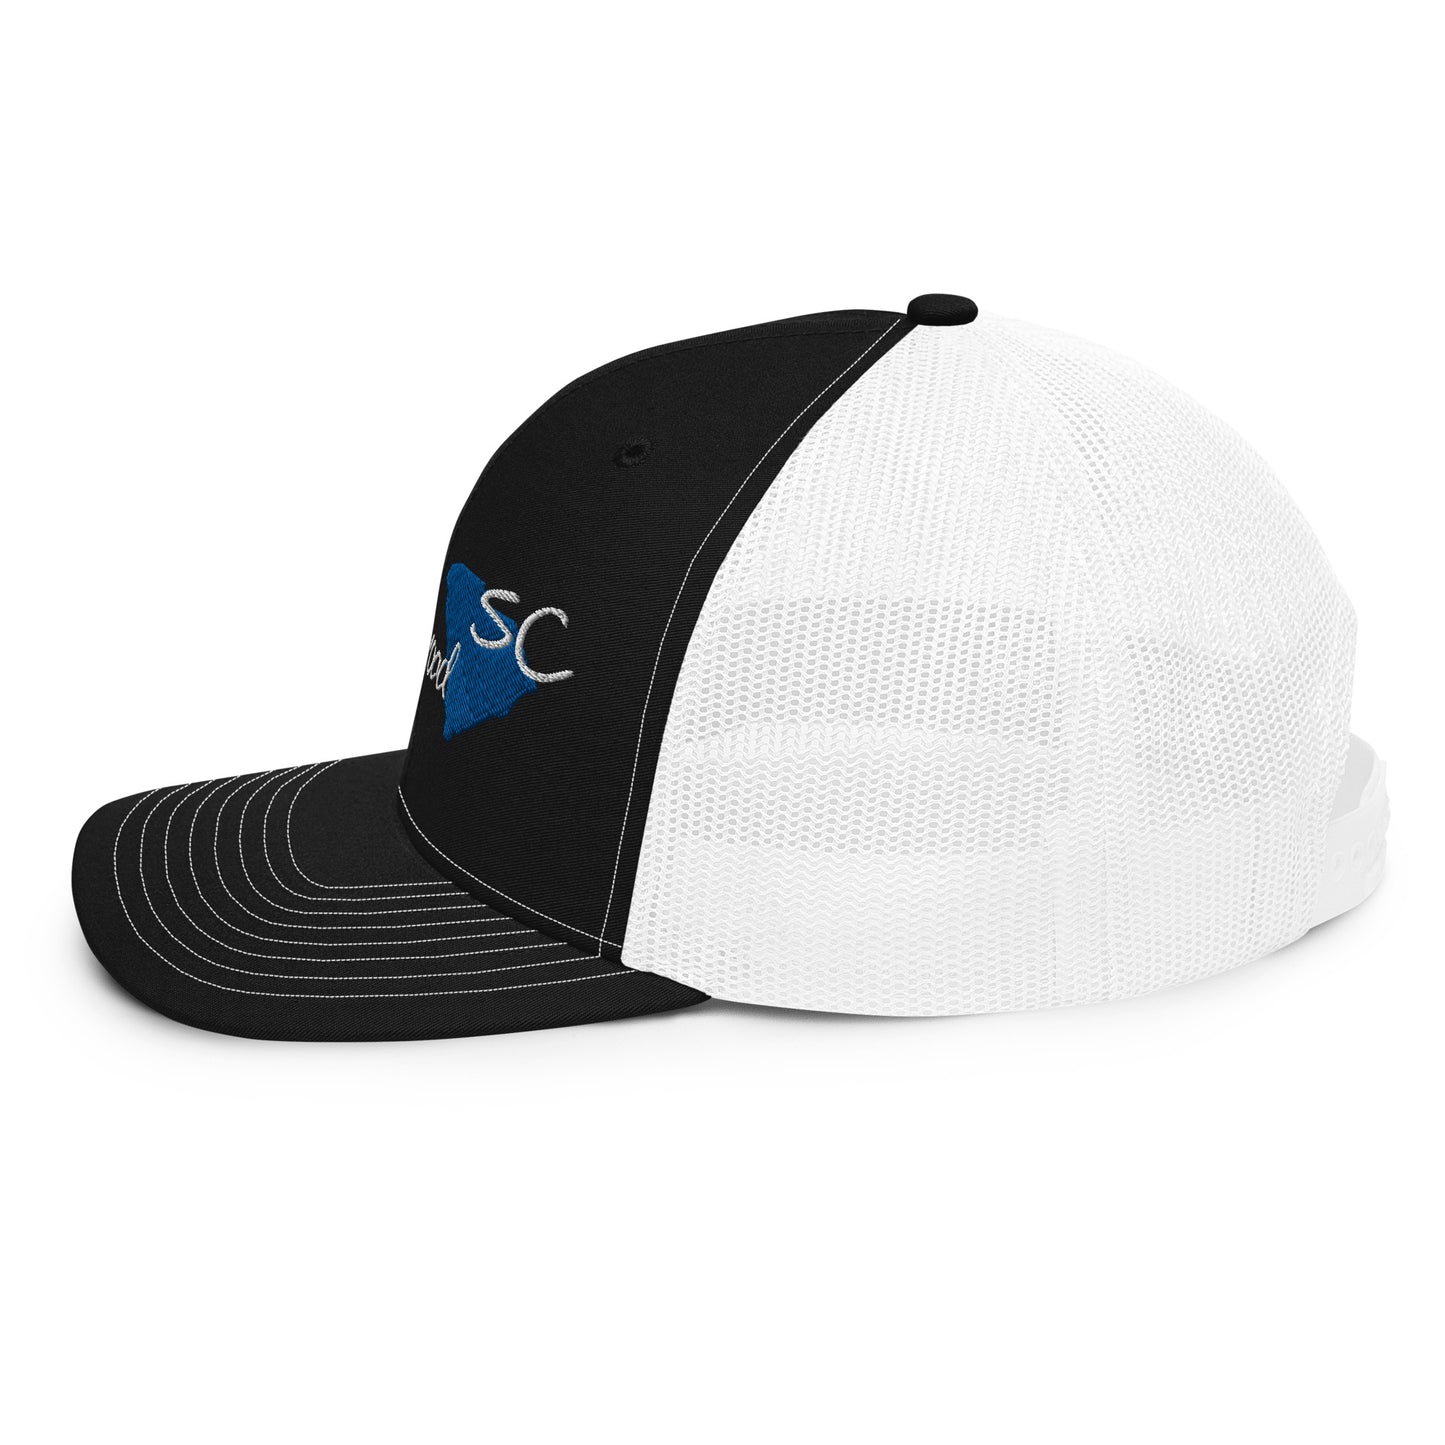 a black and white hat with a blue and white logo